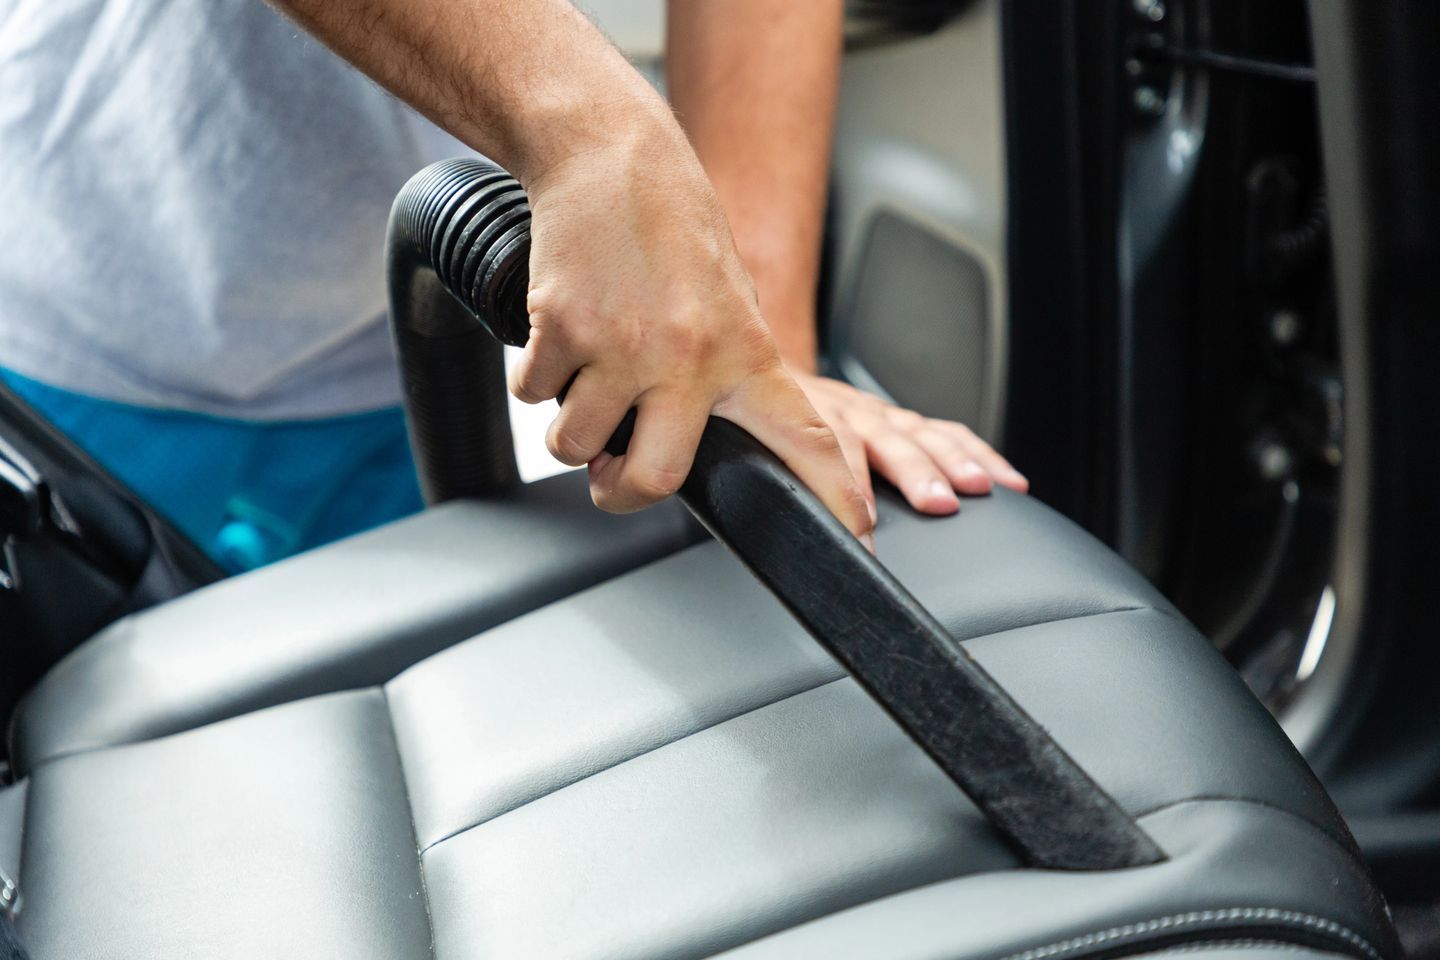 A person is using an electric razor to clean the seat of a car.